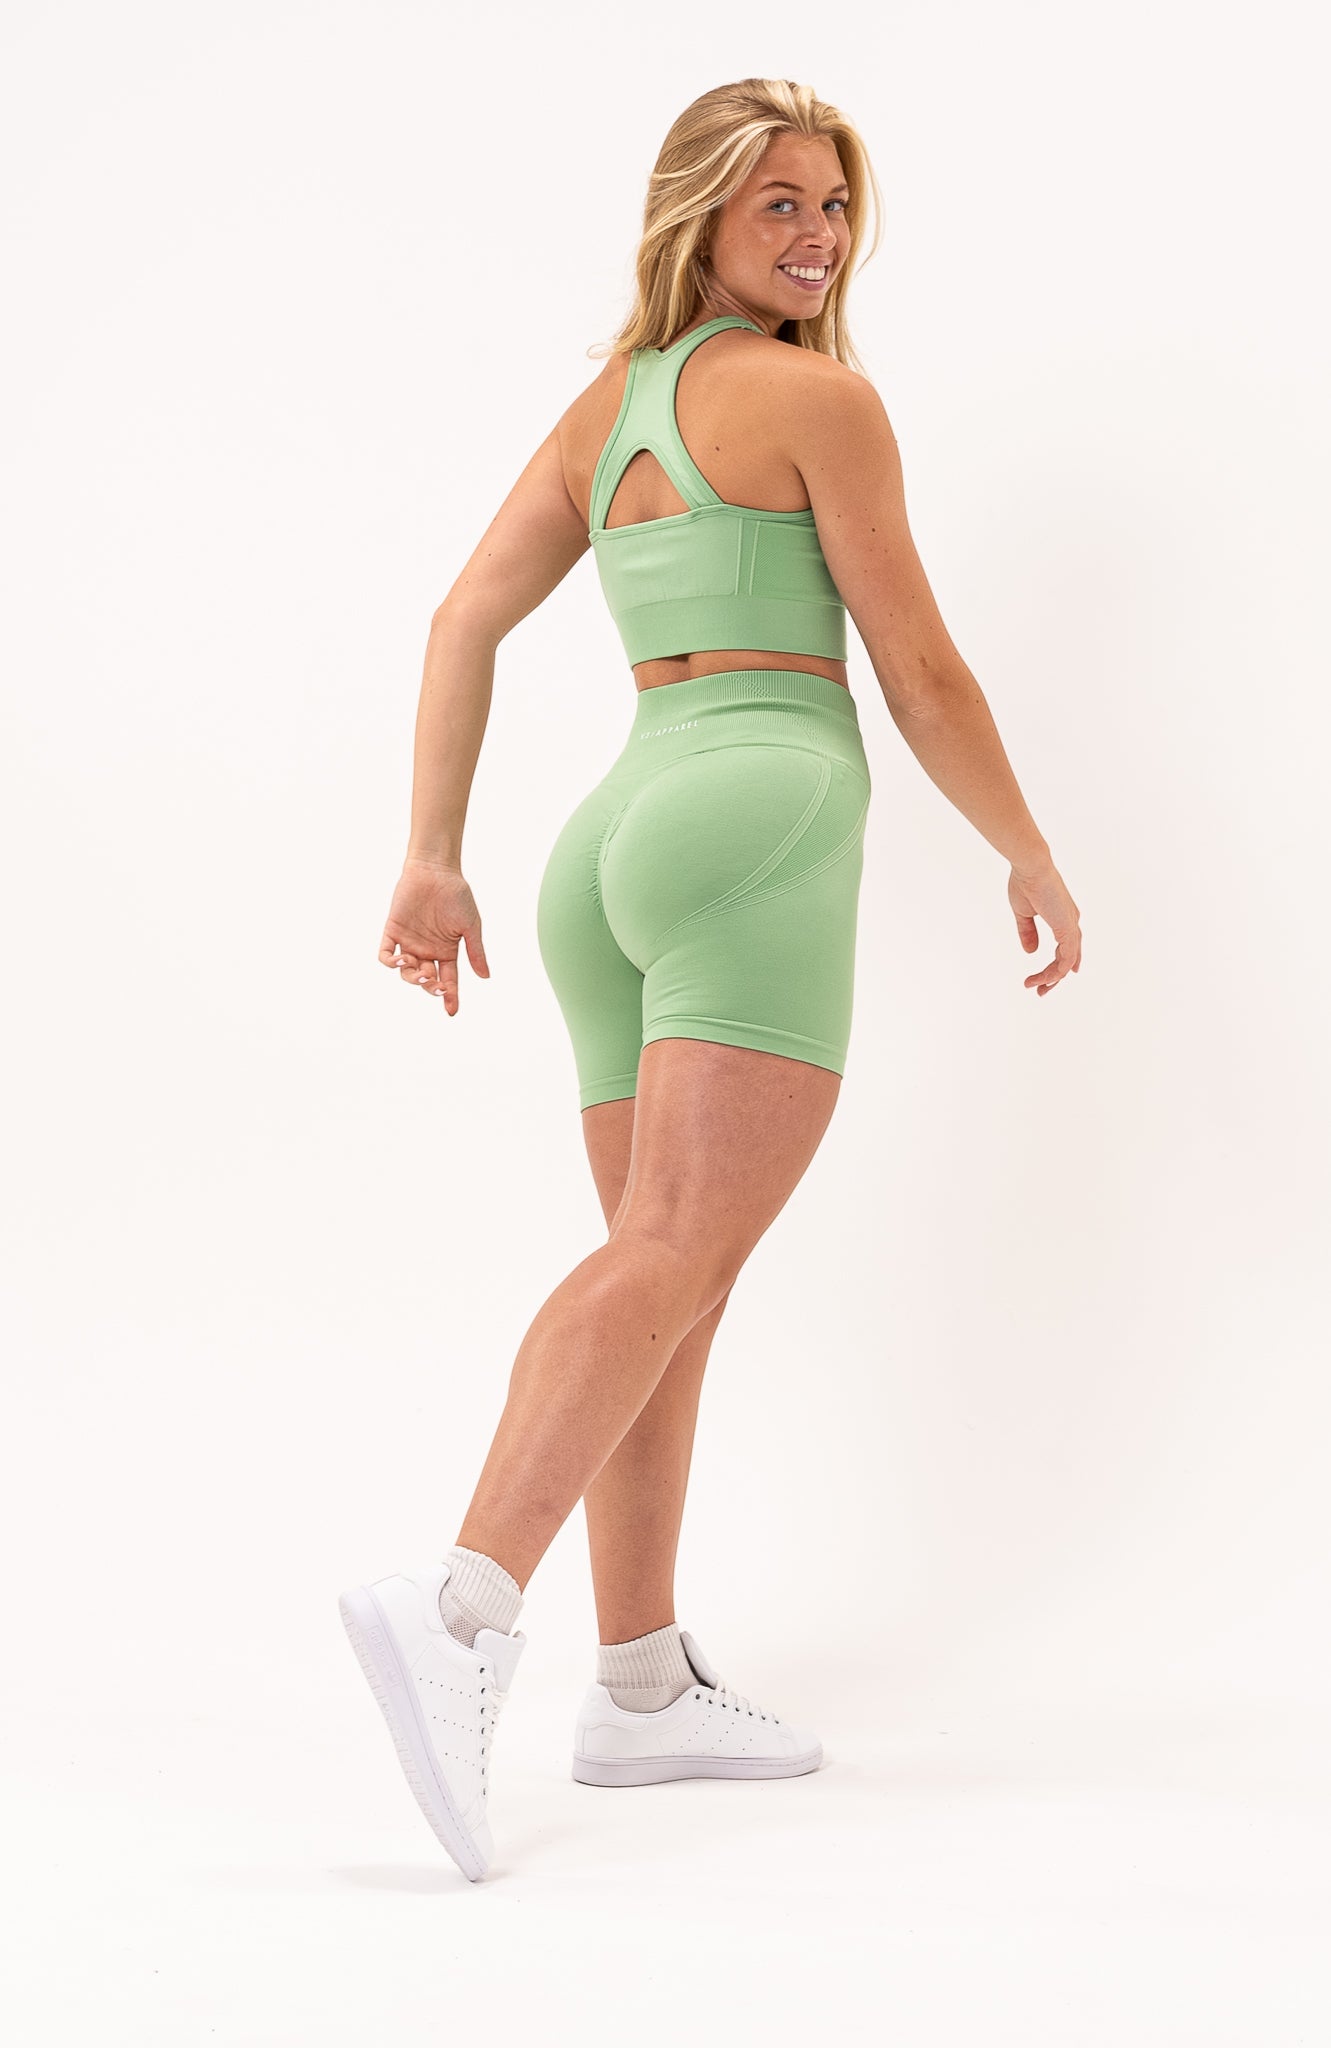 V3 Apparel Women's Tempo seamless scrunch bum shaping high waisted shorts and training sports bra in mint green – Squat proof 5 inch leg cycle shorts and training bra for Gym workouts training, Running, yoga, bodybuilding and bikini fitness.